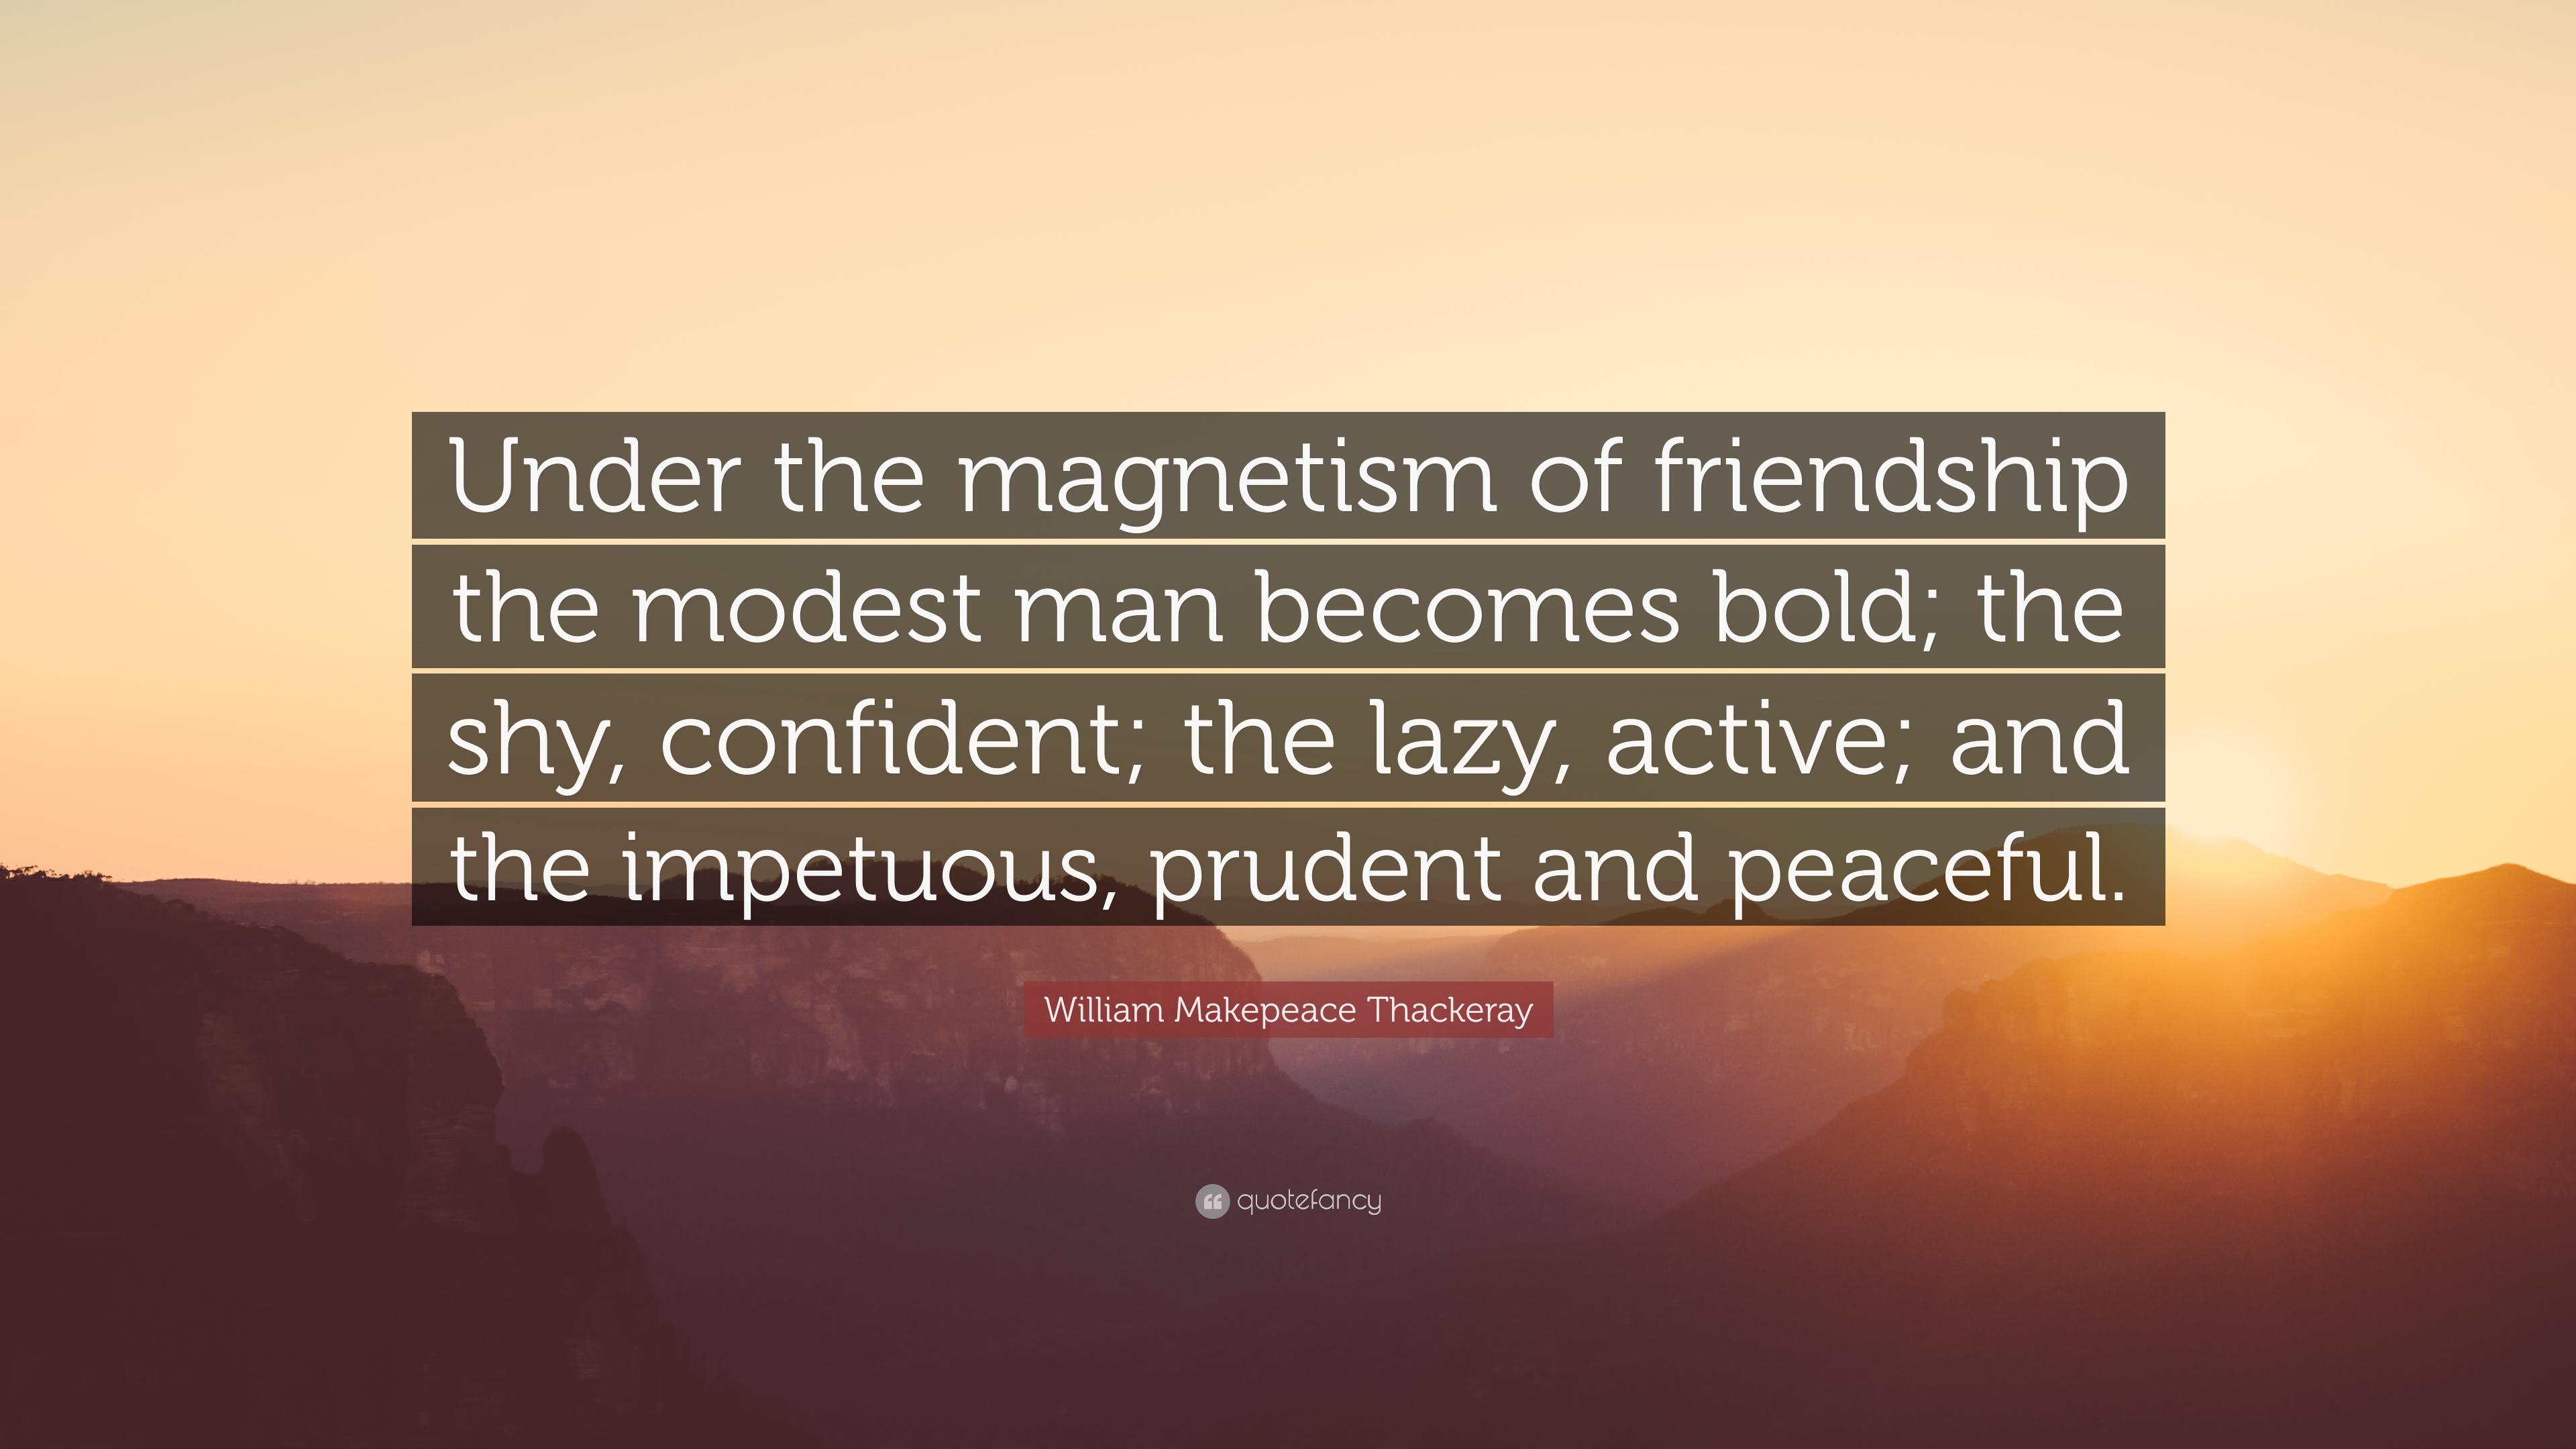 William Makepeace Thackeray Quote: “Under the magnetism